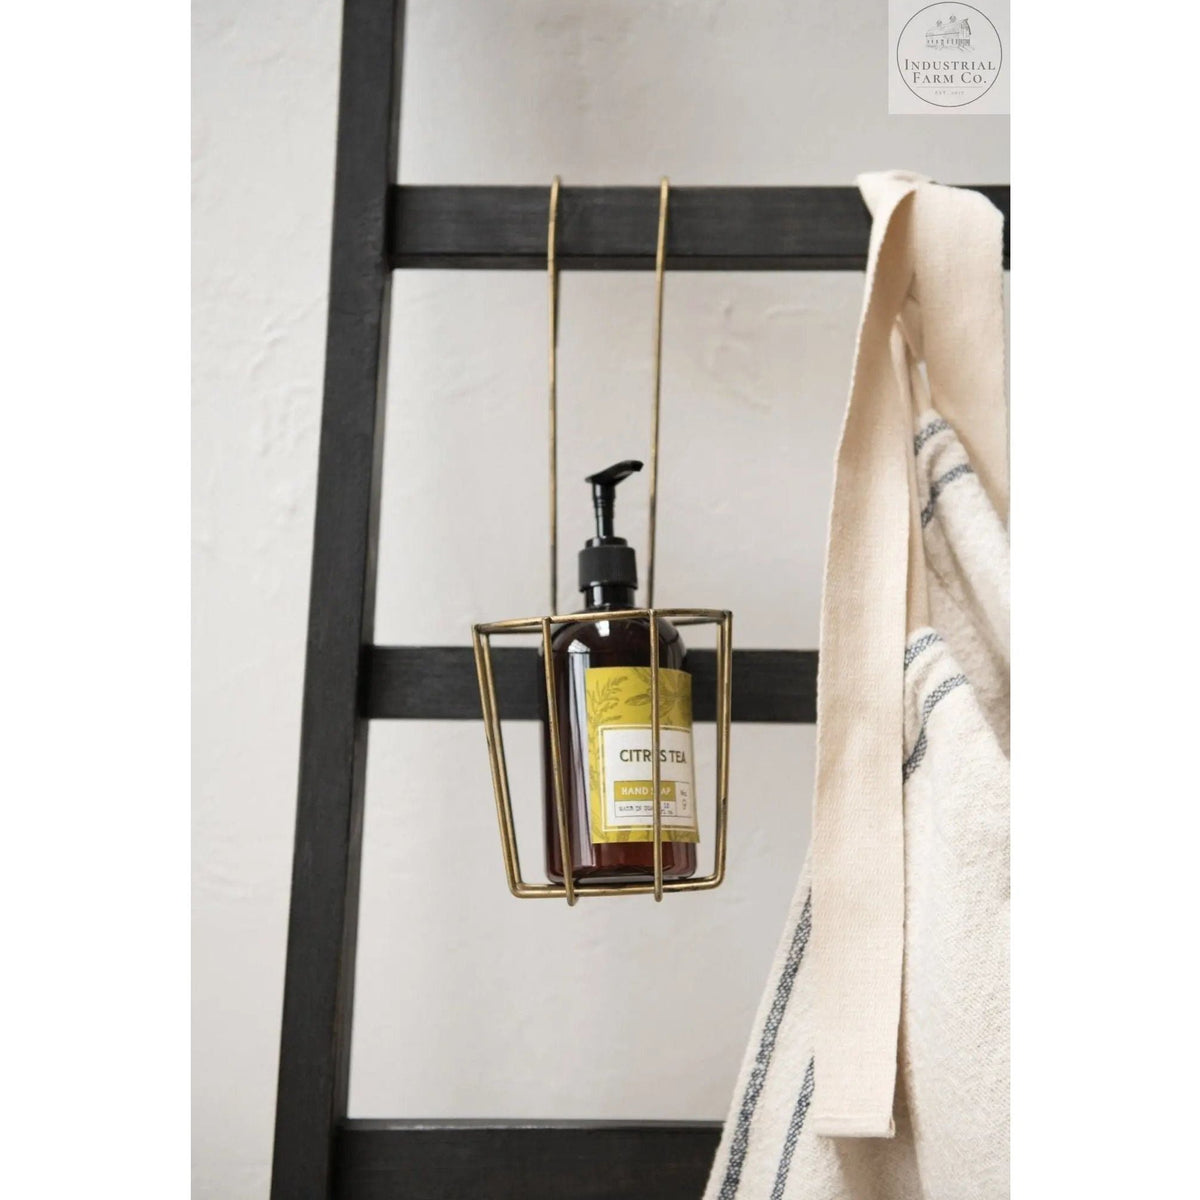 Decorative Hooks and Storage For Everyroom In Your Home